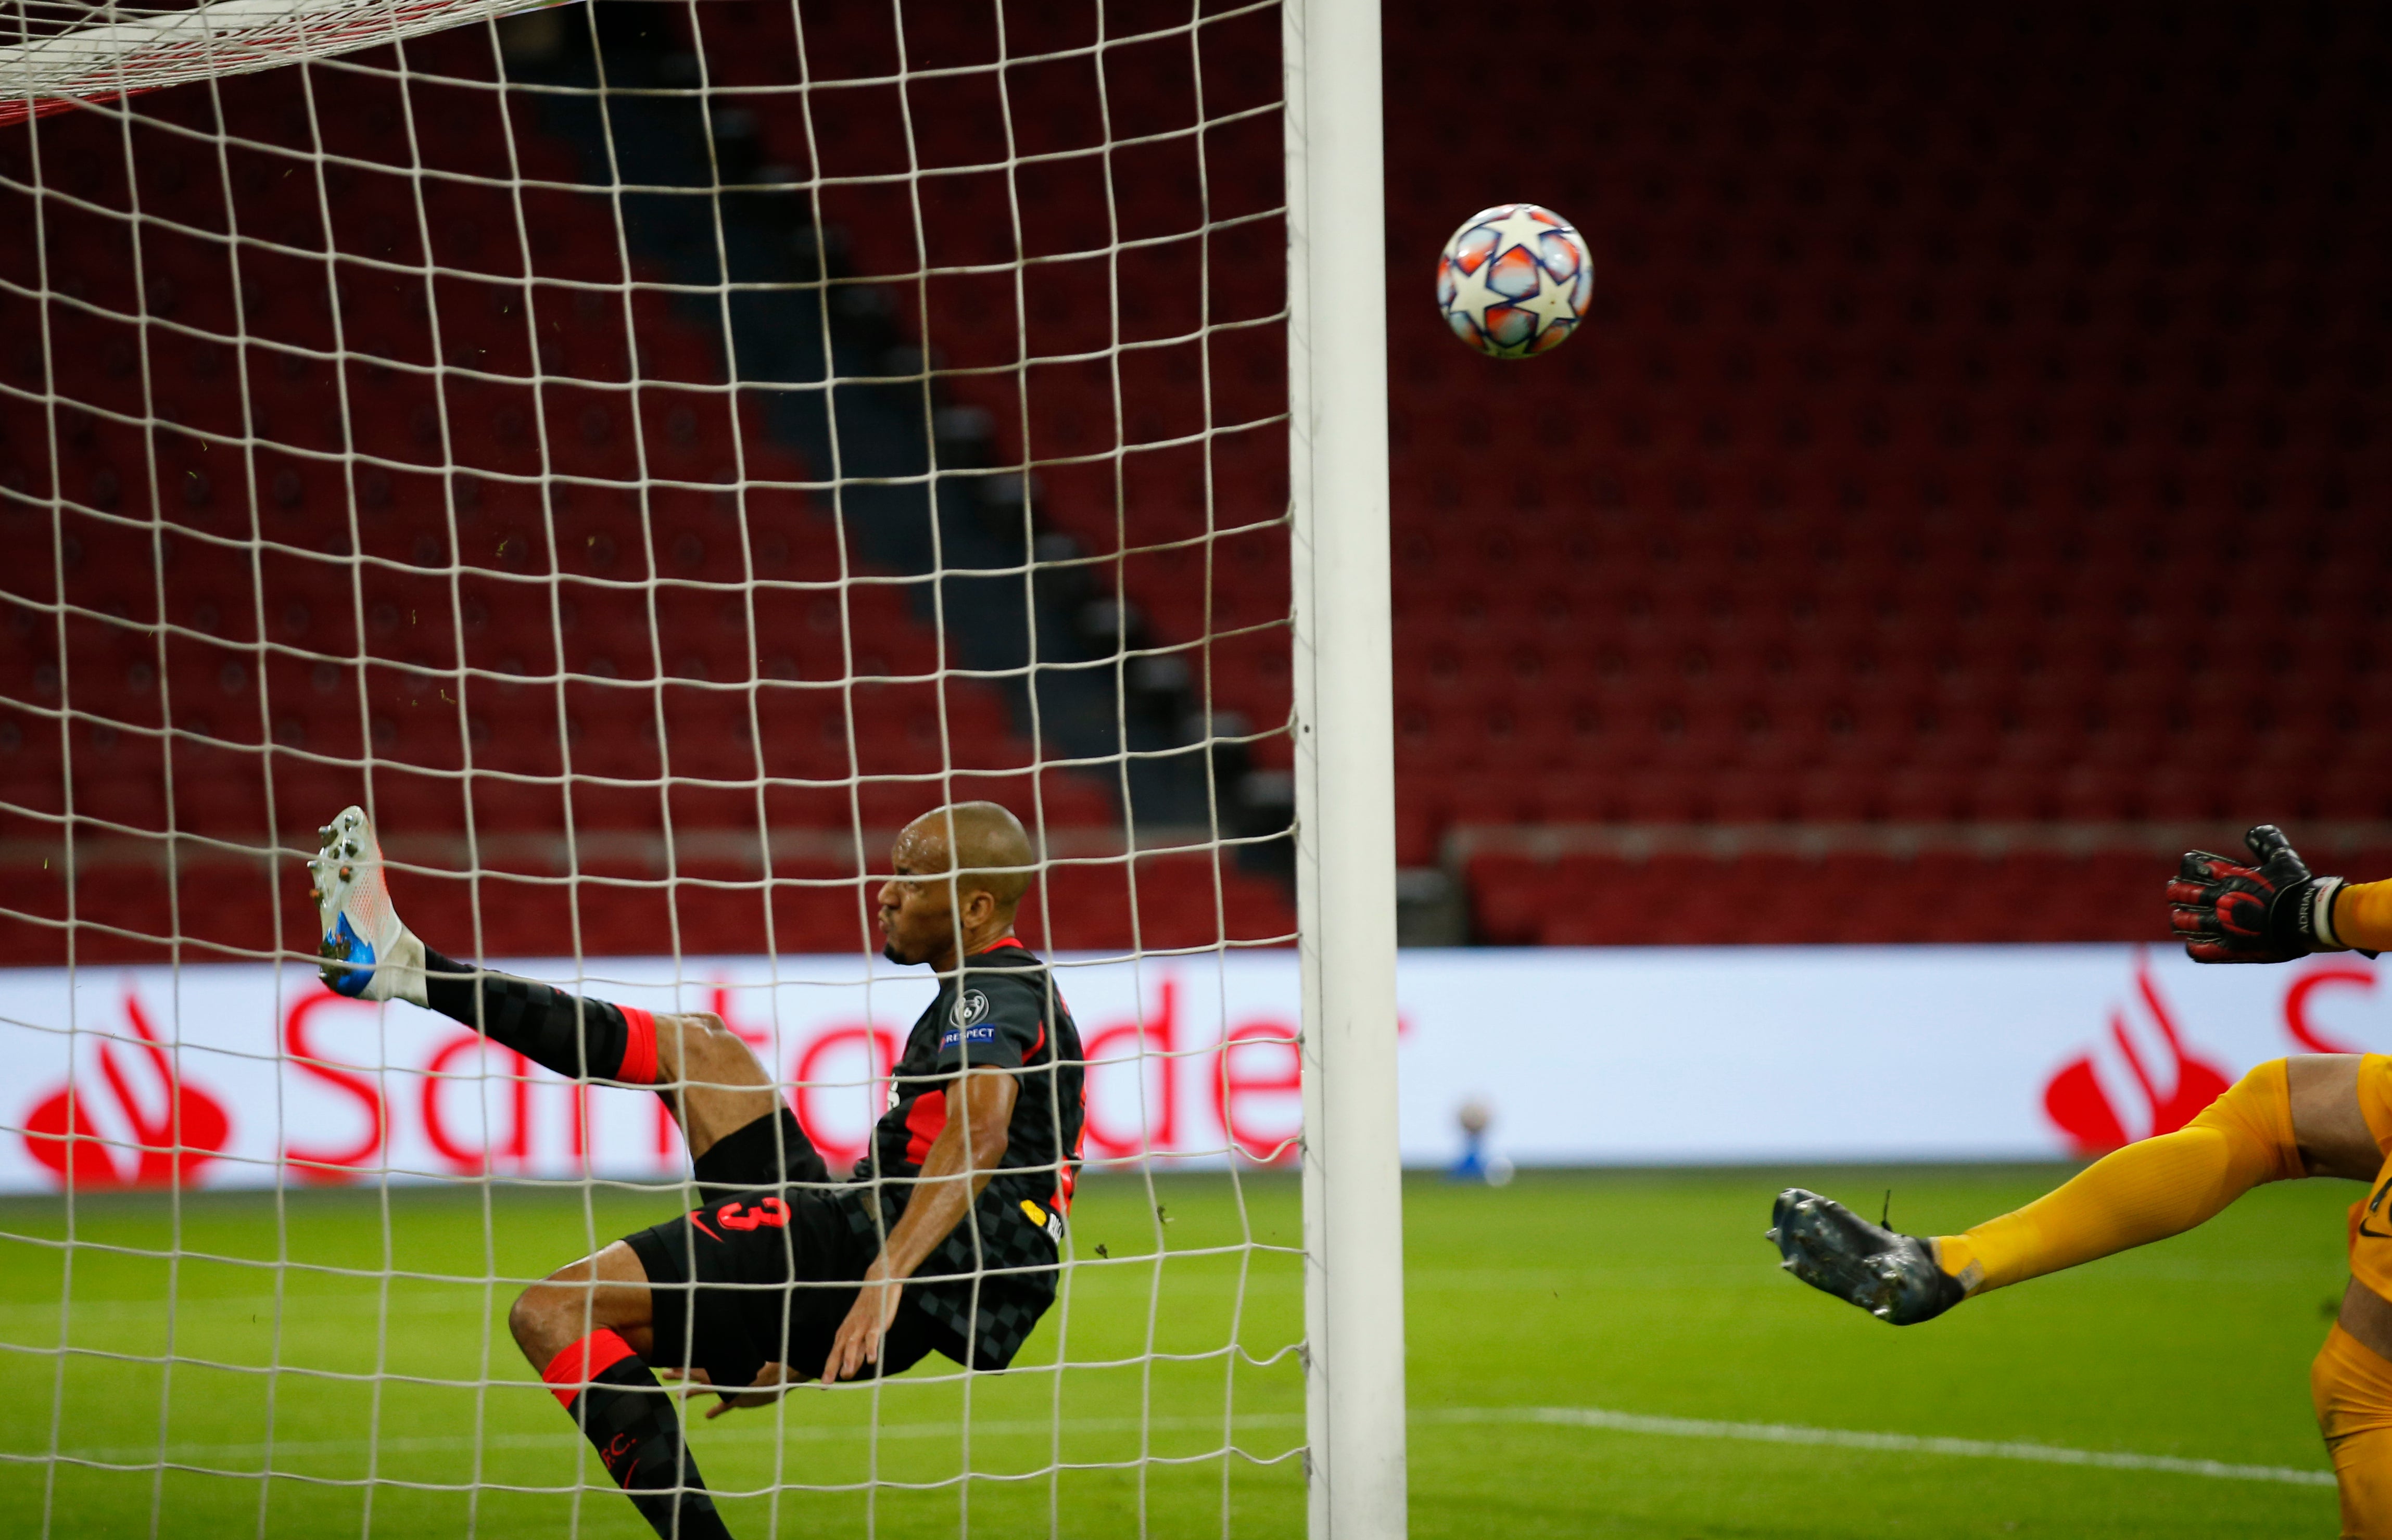 Fabinho made a crucial goal-line clearance in Liverpool’s 1-0 victory over Ajax